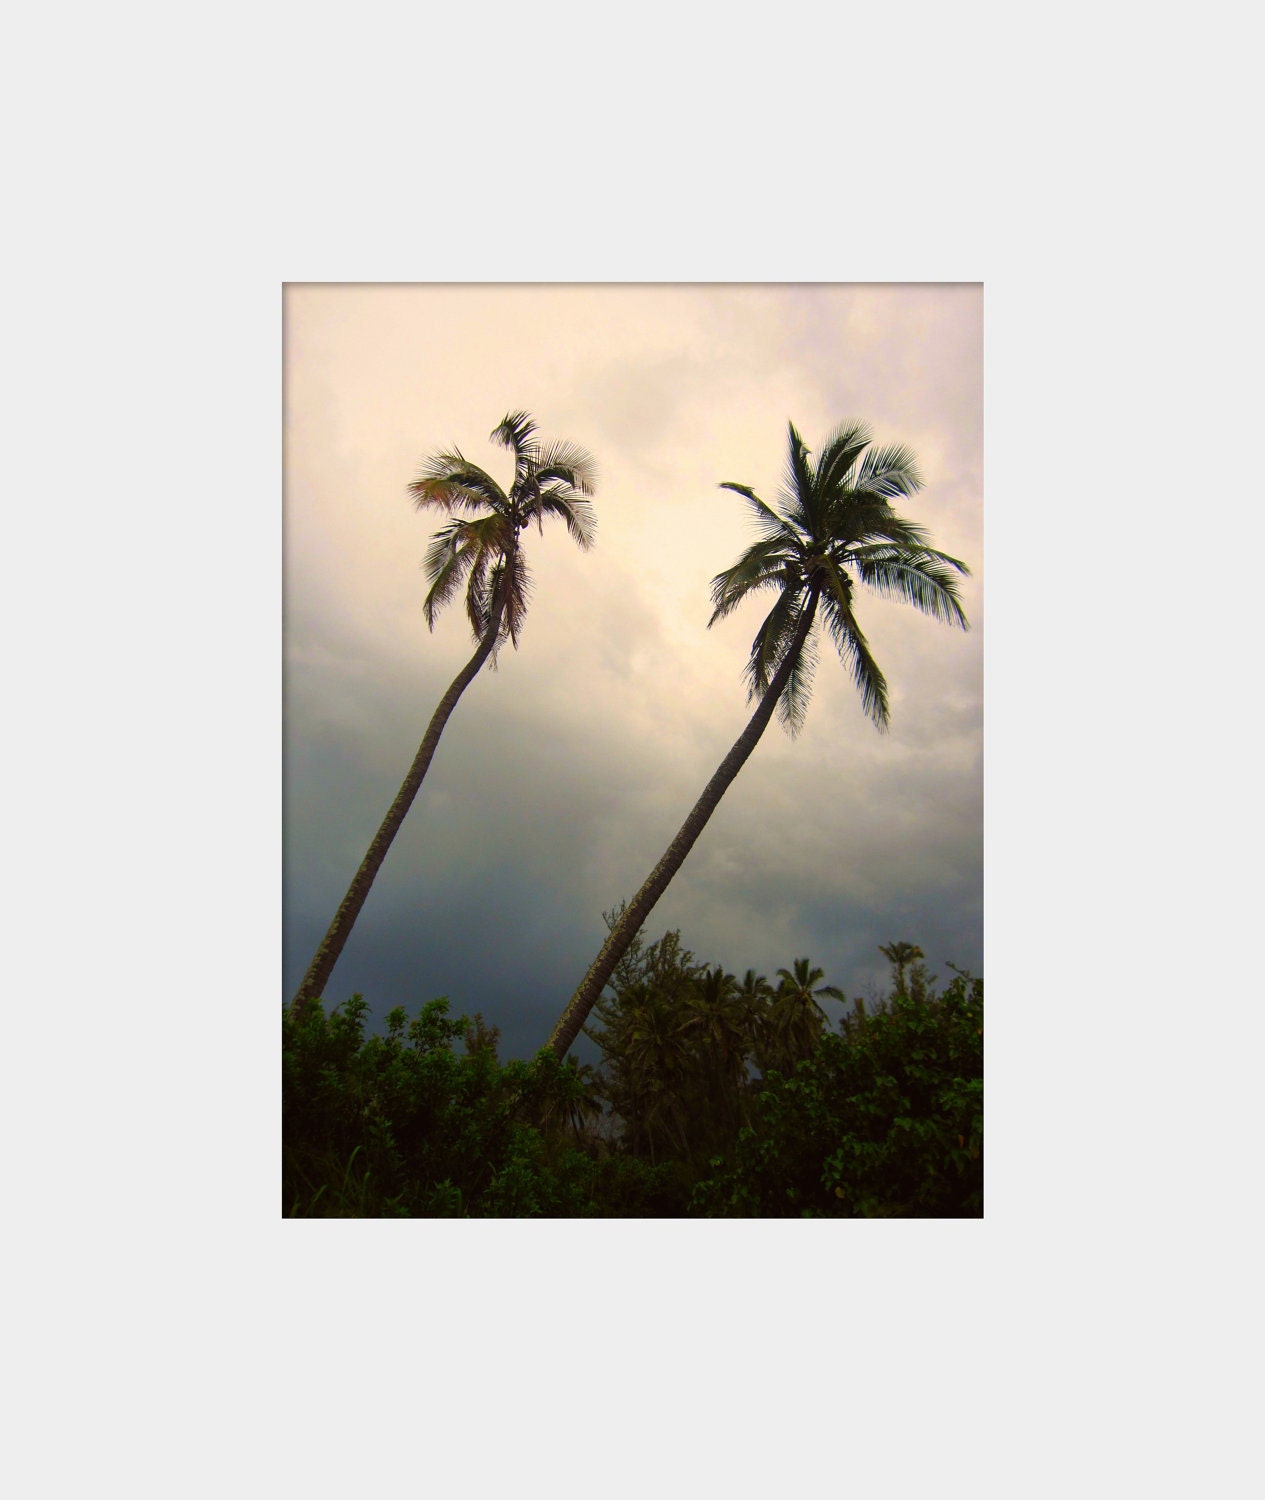 Parallel Palms: a fine art photograph print of two leaning palm trees on a stormy day in Hawaii - UninventedColors